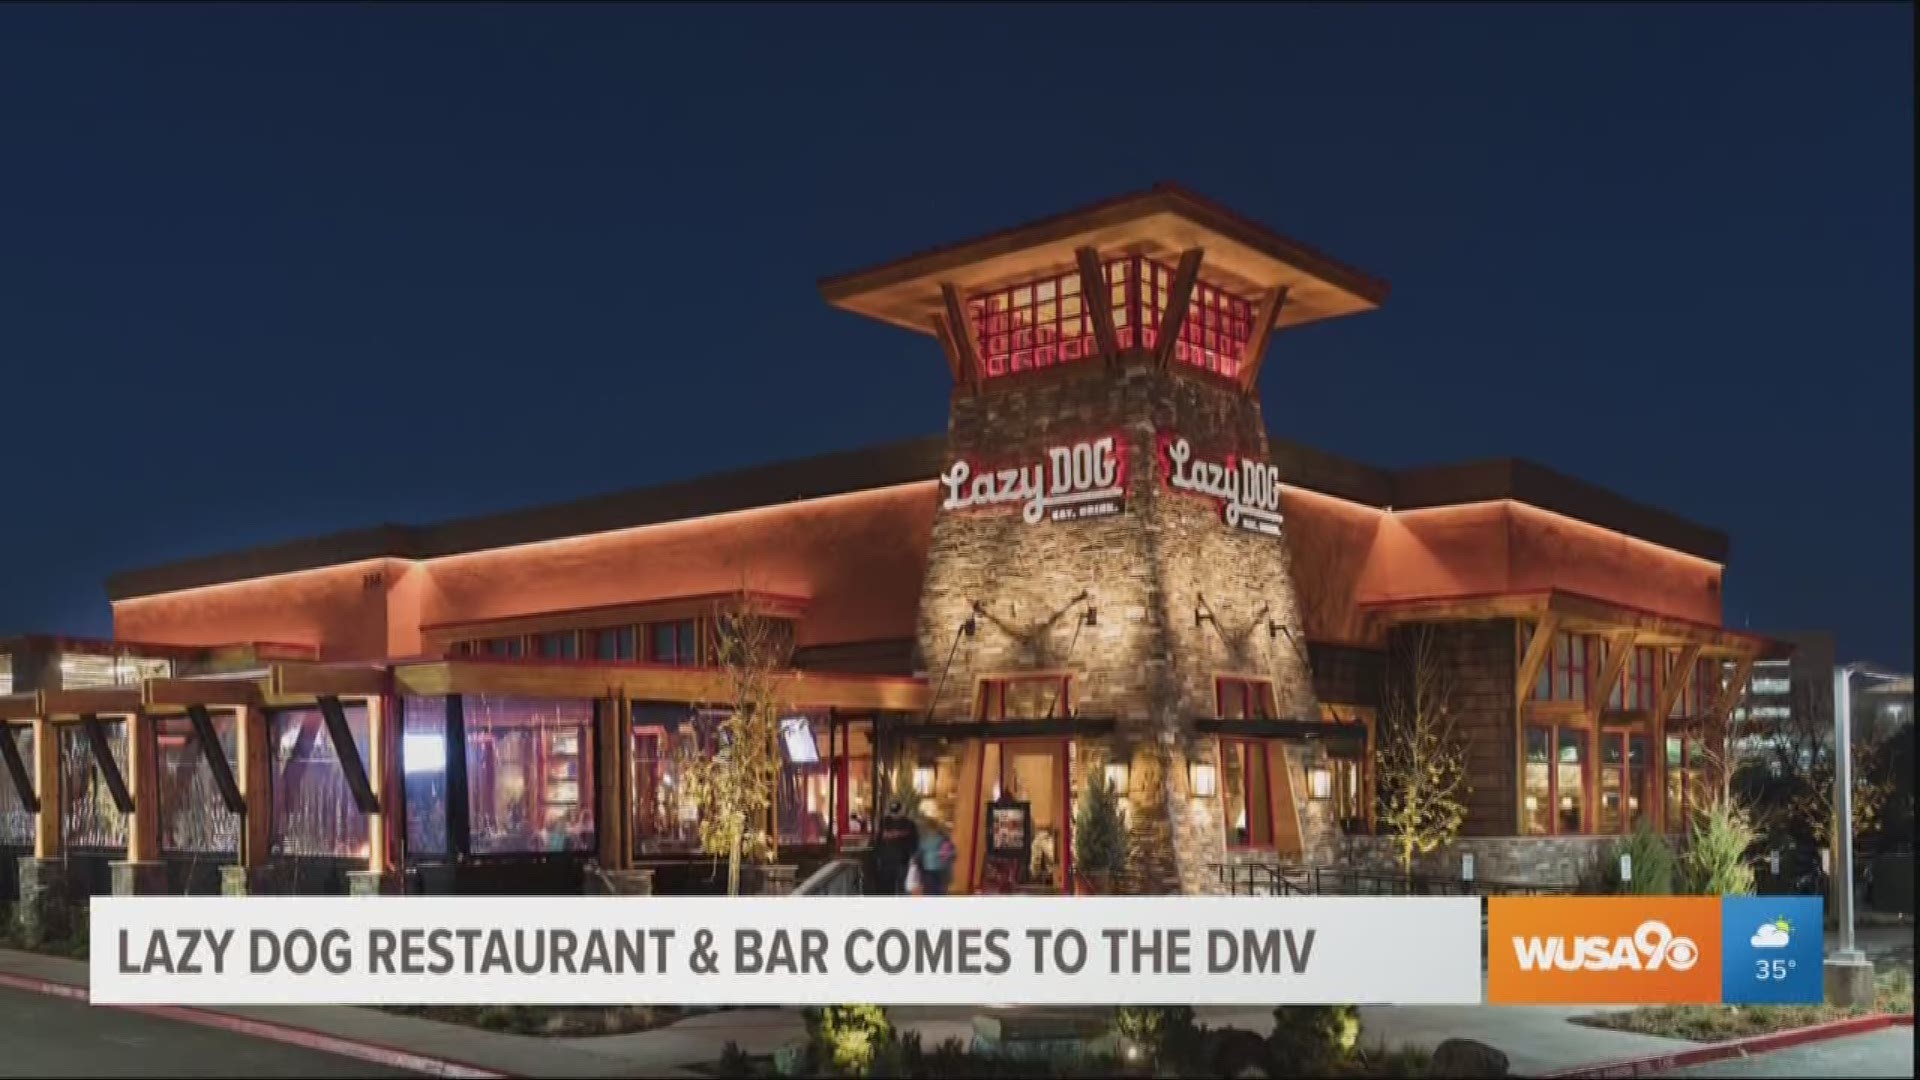 Chef Ignacio Patzy, the regional culinary director of Lazy Dog Restaurant and Bar tells us about the newest location in Chantilly, Virginia.